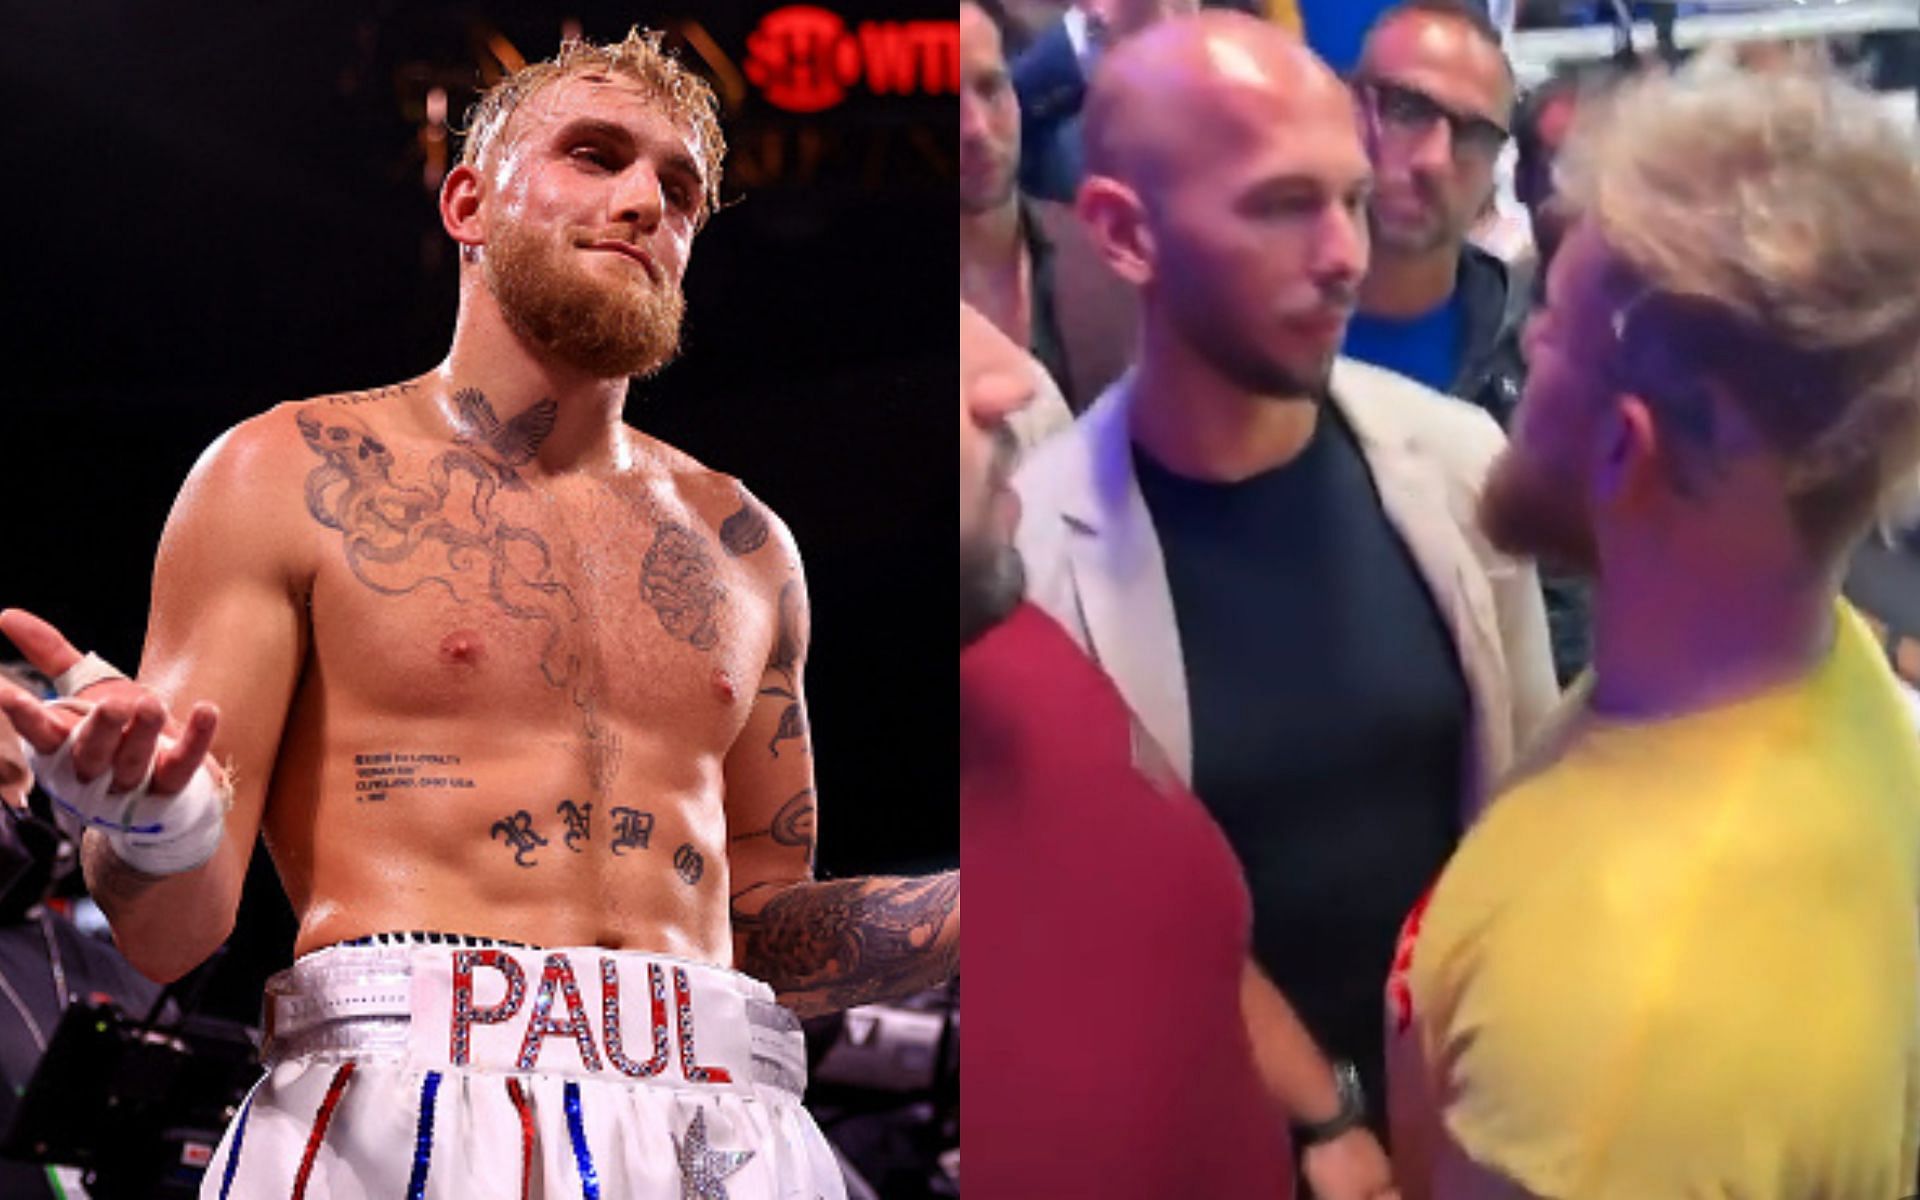 Jake Paul (left) (Image via Getty) and Andrew Tate facing off with Paul (right)(Image via Twitter @GlobalTitansFC)